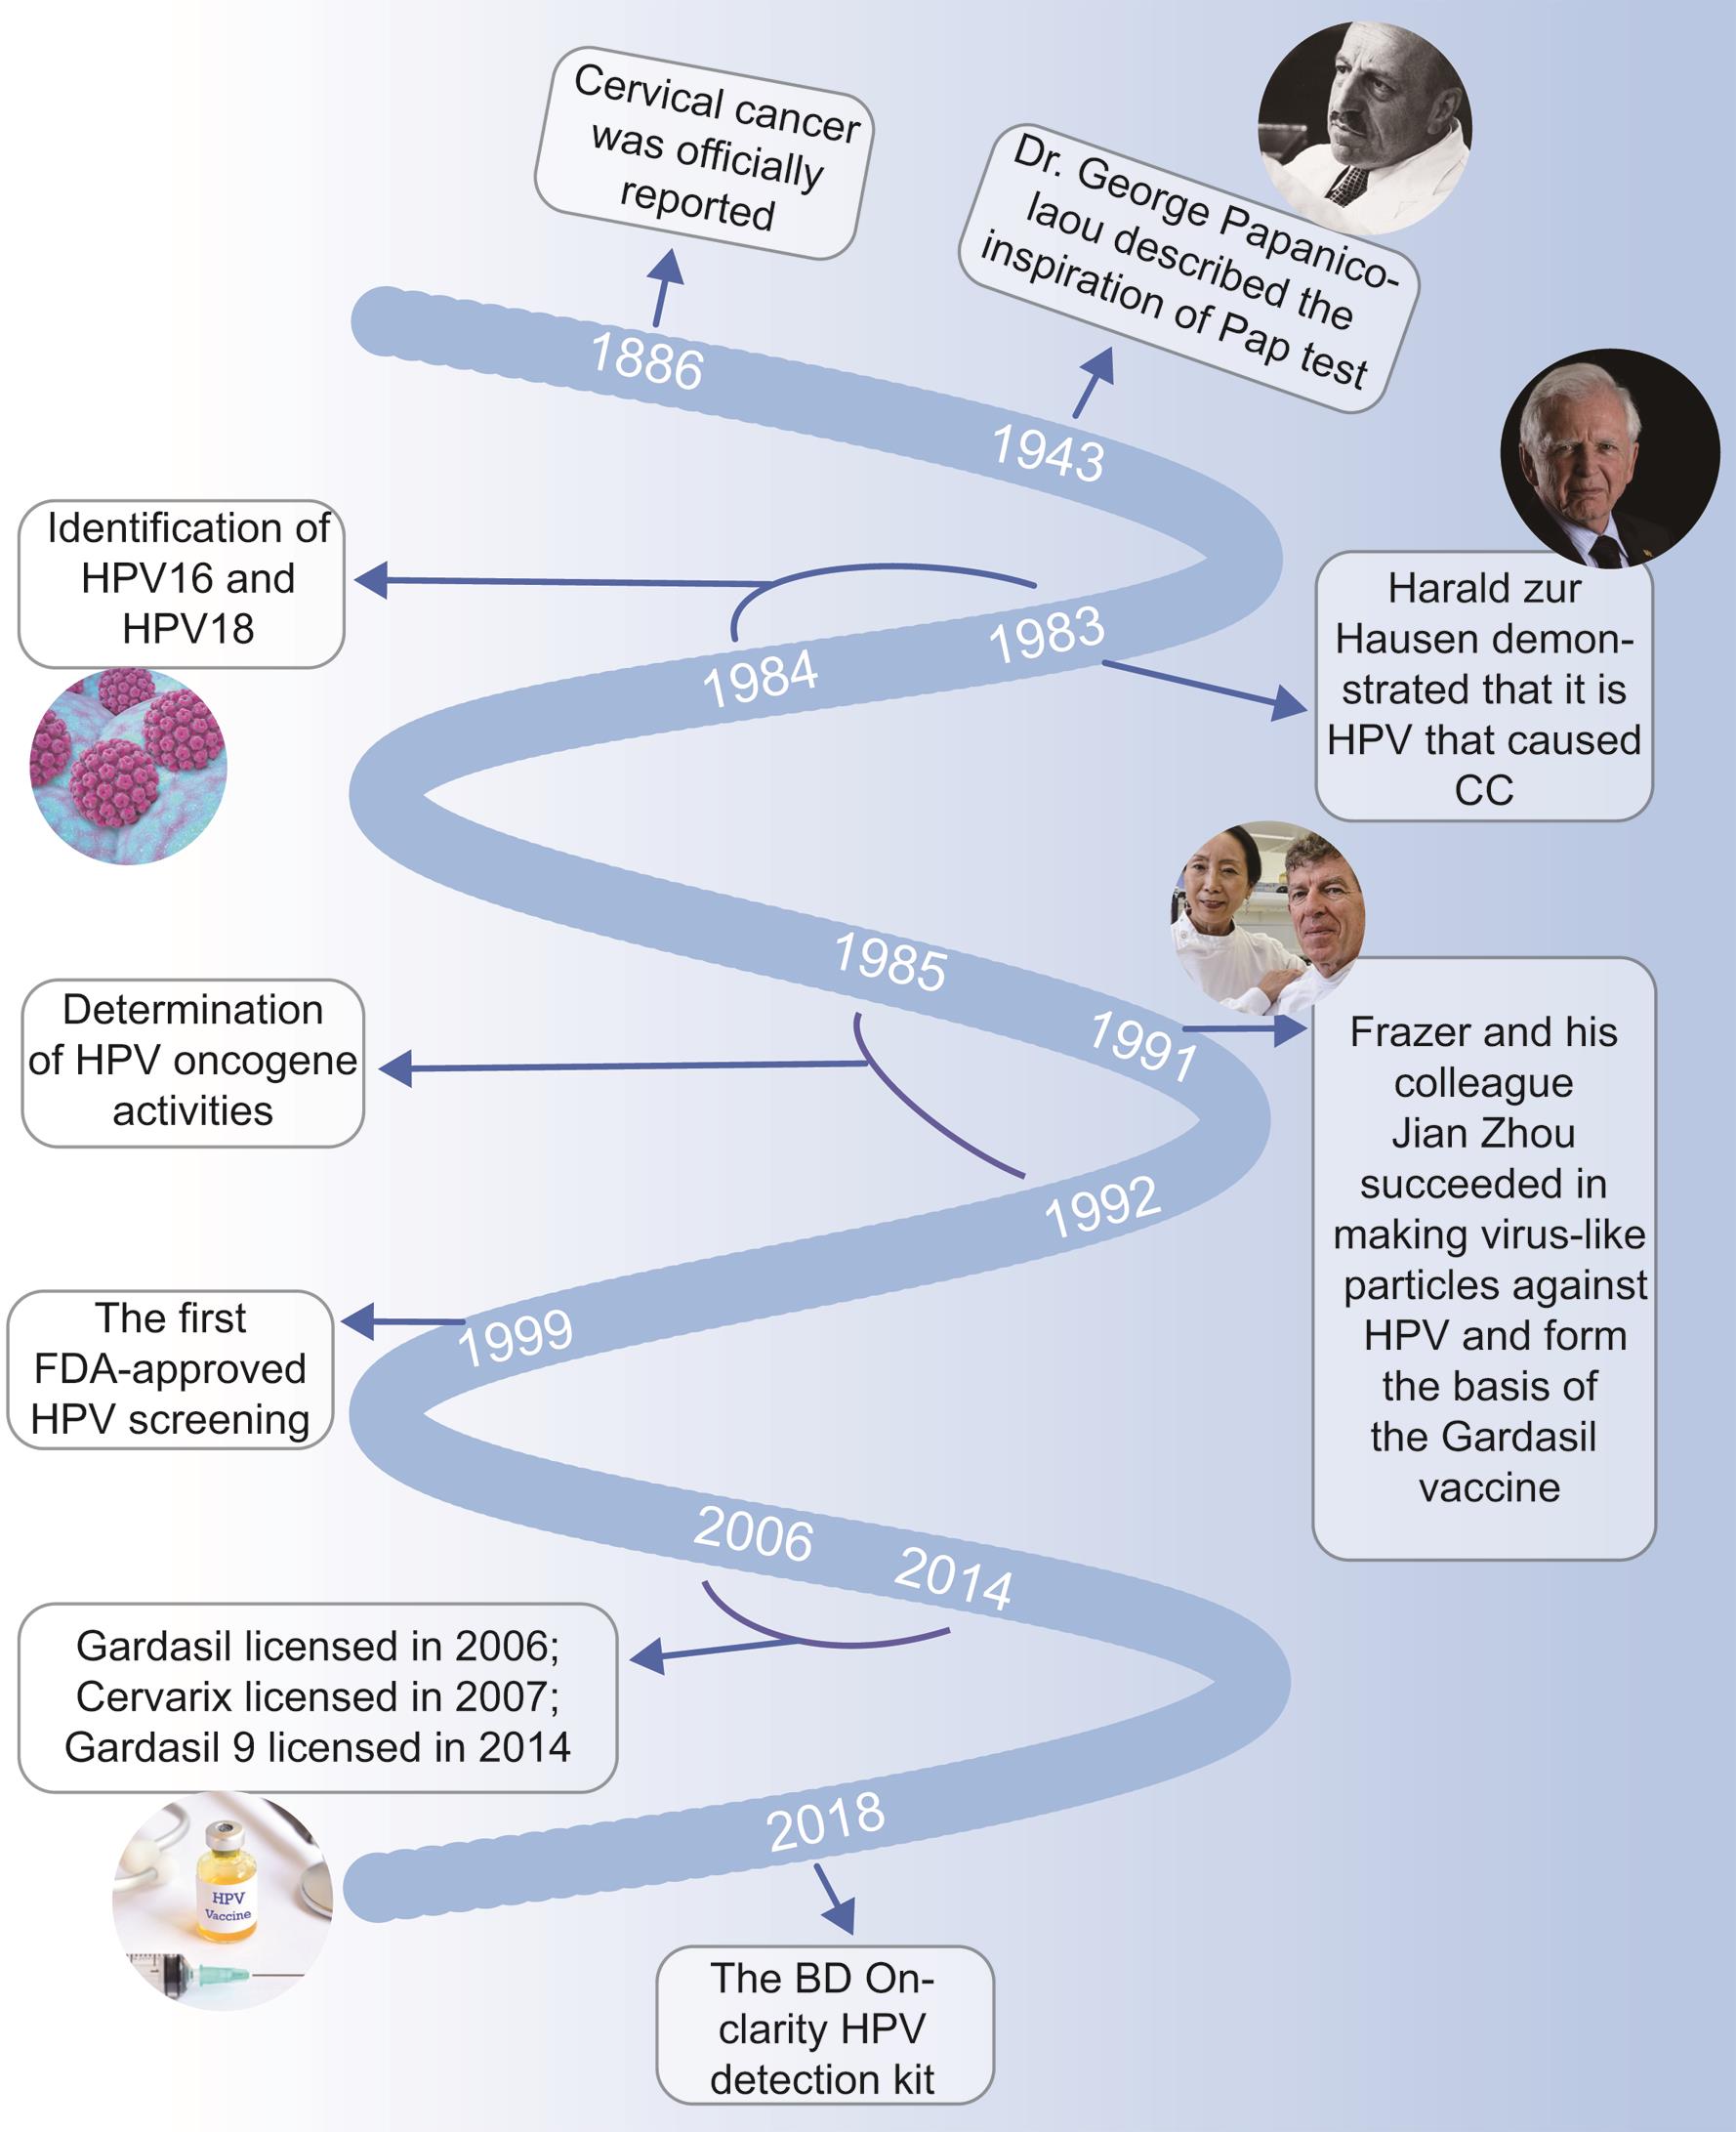 This figure shows the milestone events in HPV screening and prevention.